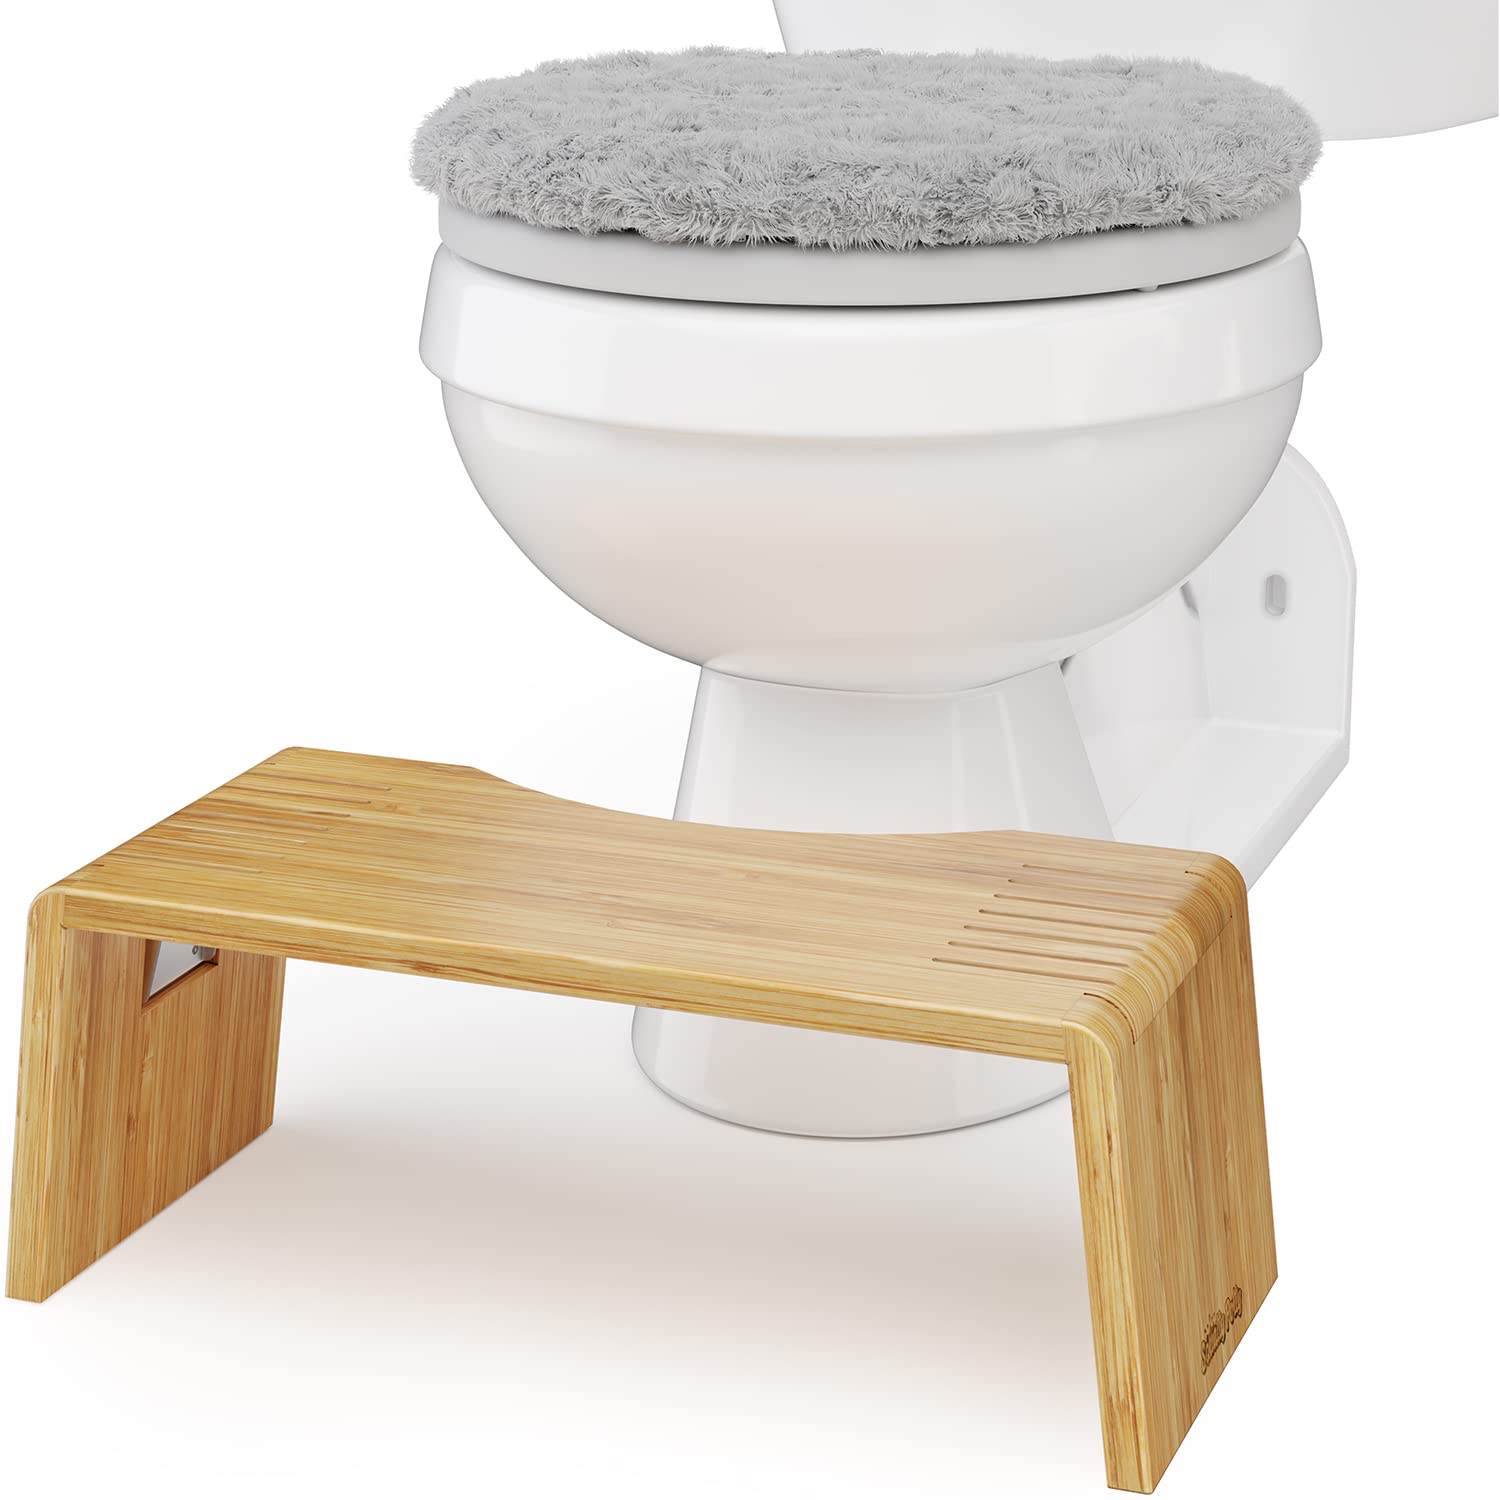 Squatty Potty Oslo Folding Bamboo Toilet Stool – 7 Inches, Collapsible Bathroom Stool for Kids and Adults – Brown, Portable and Space-Saving